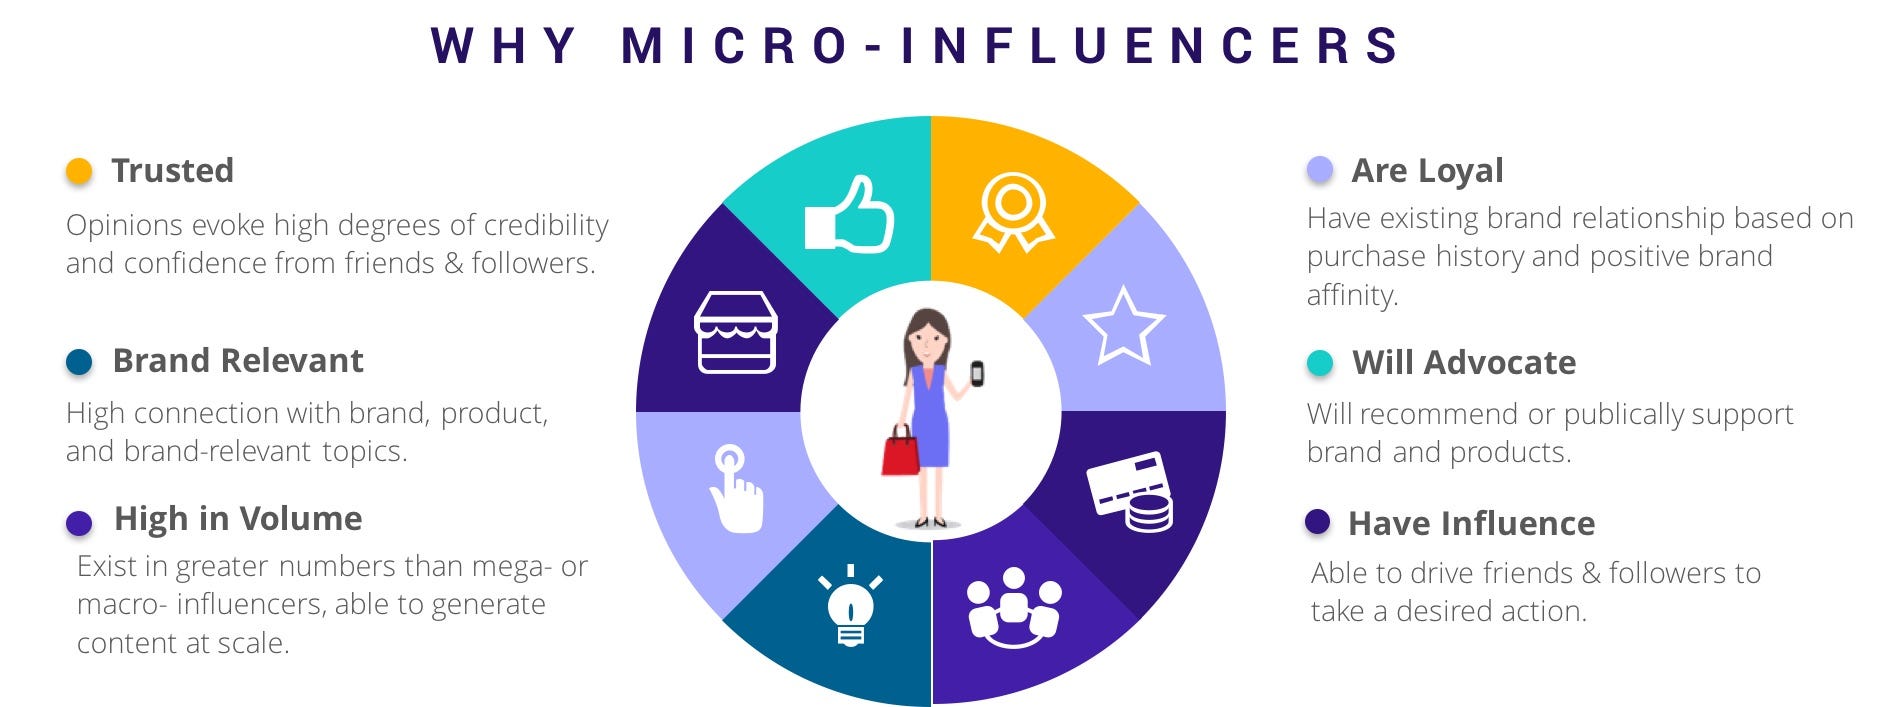 Collaborating with micro-influencers is a great way to advertise online.